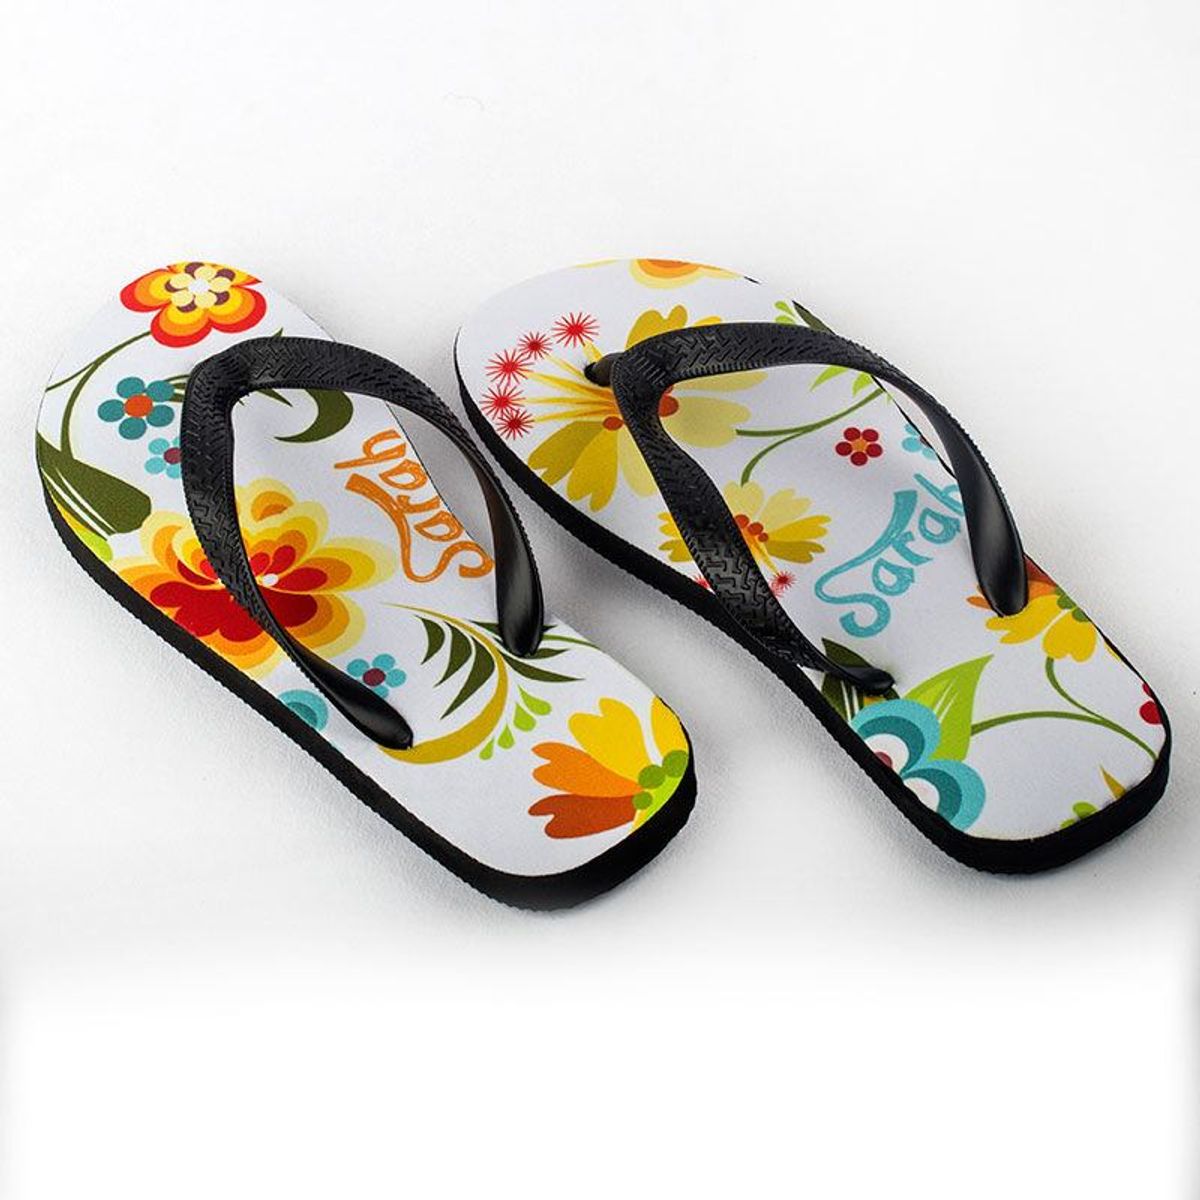 Custom Flip Flops with Printed Photos for Summer